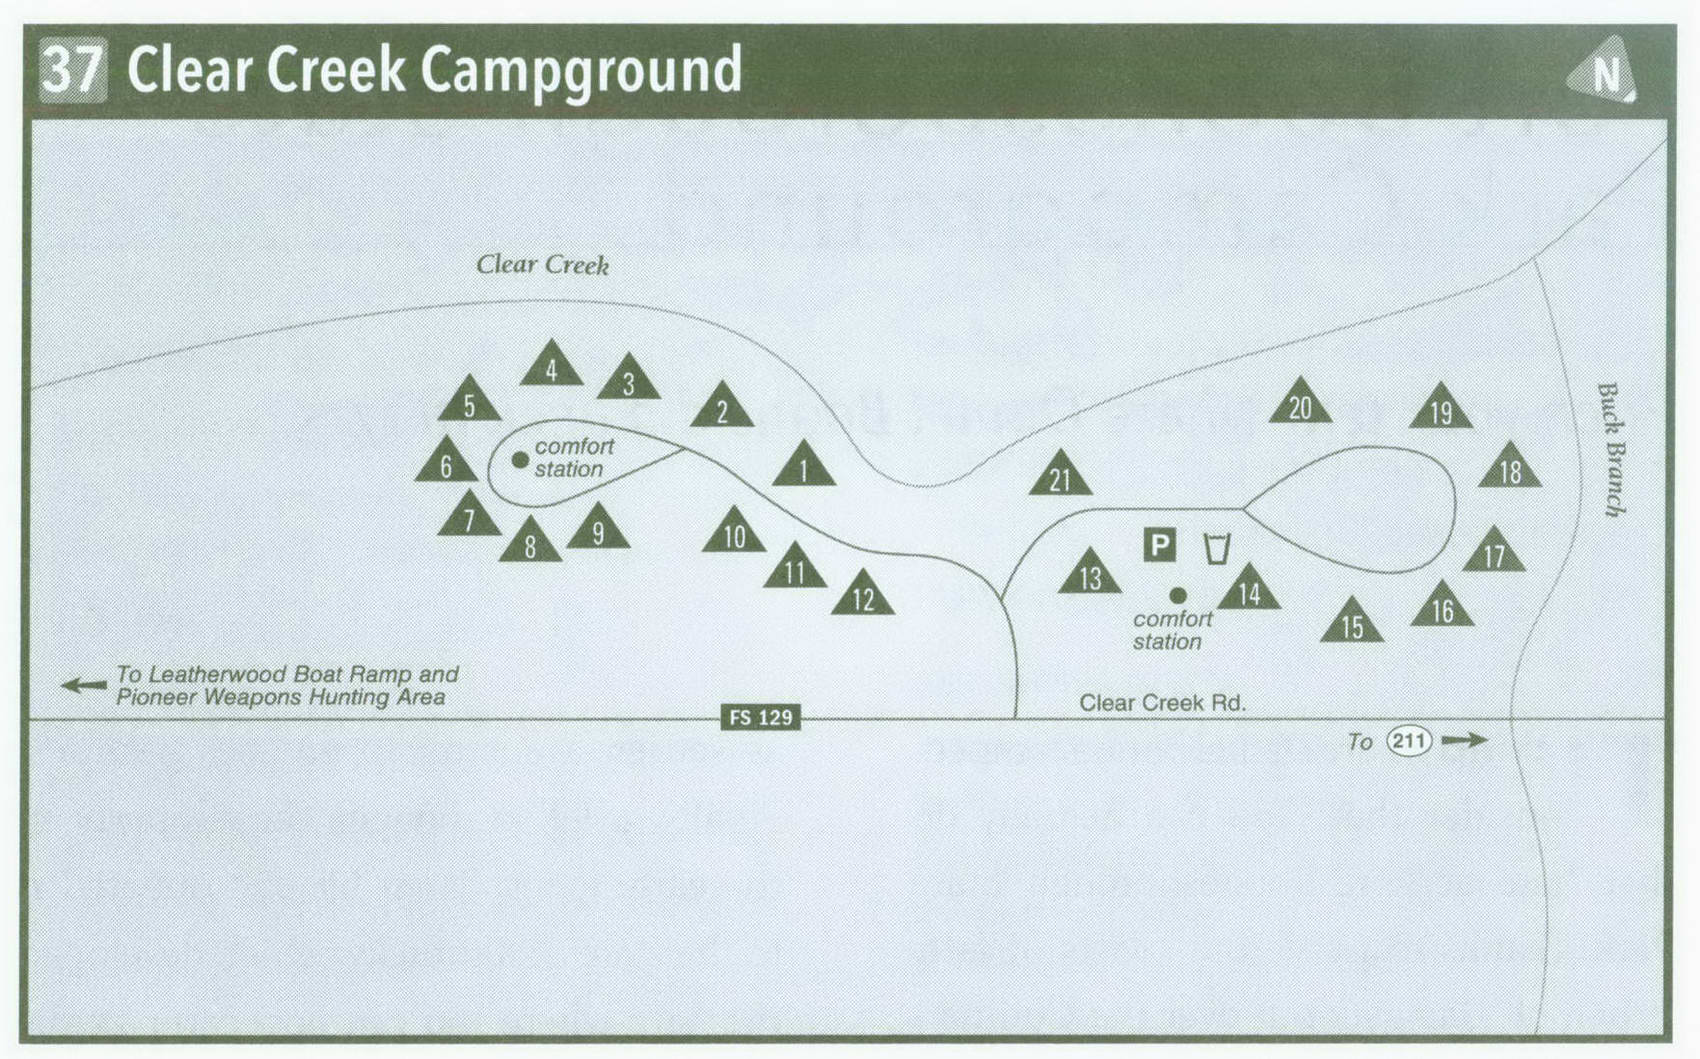 Plan of Clear Creek Campground